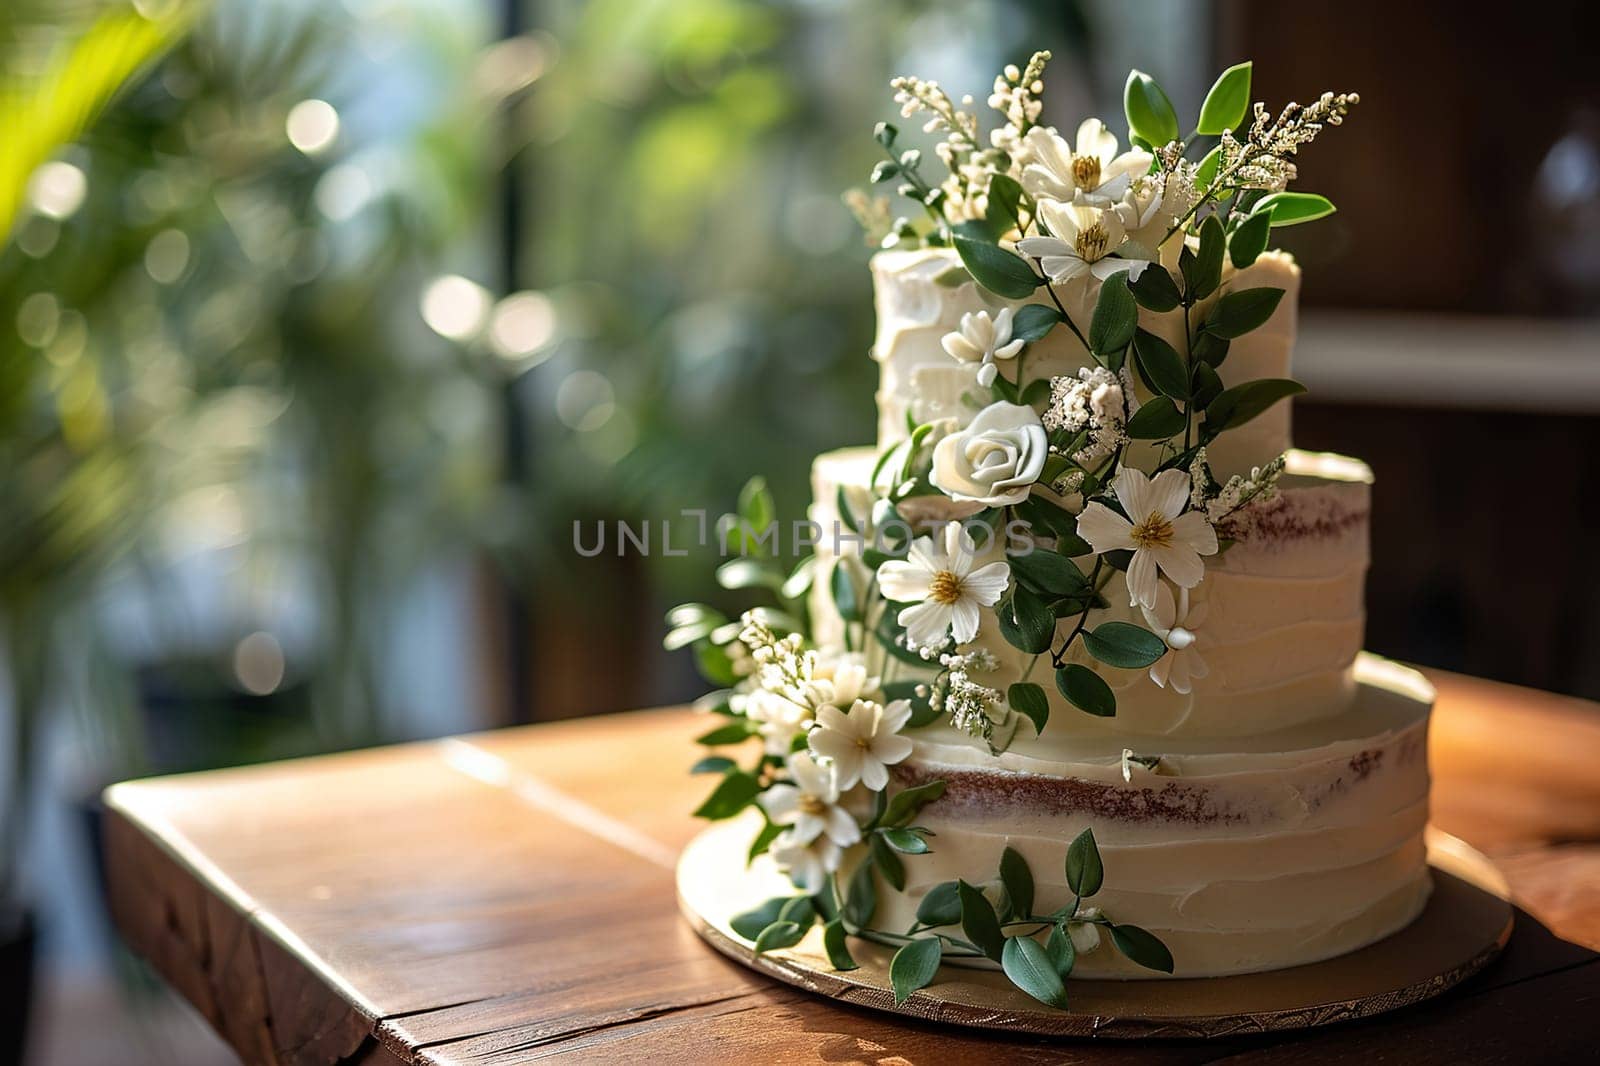 Elegant white wedding cake four tiers high and decorated with flowers. Generated by artificial intelligence by Vovmar